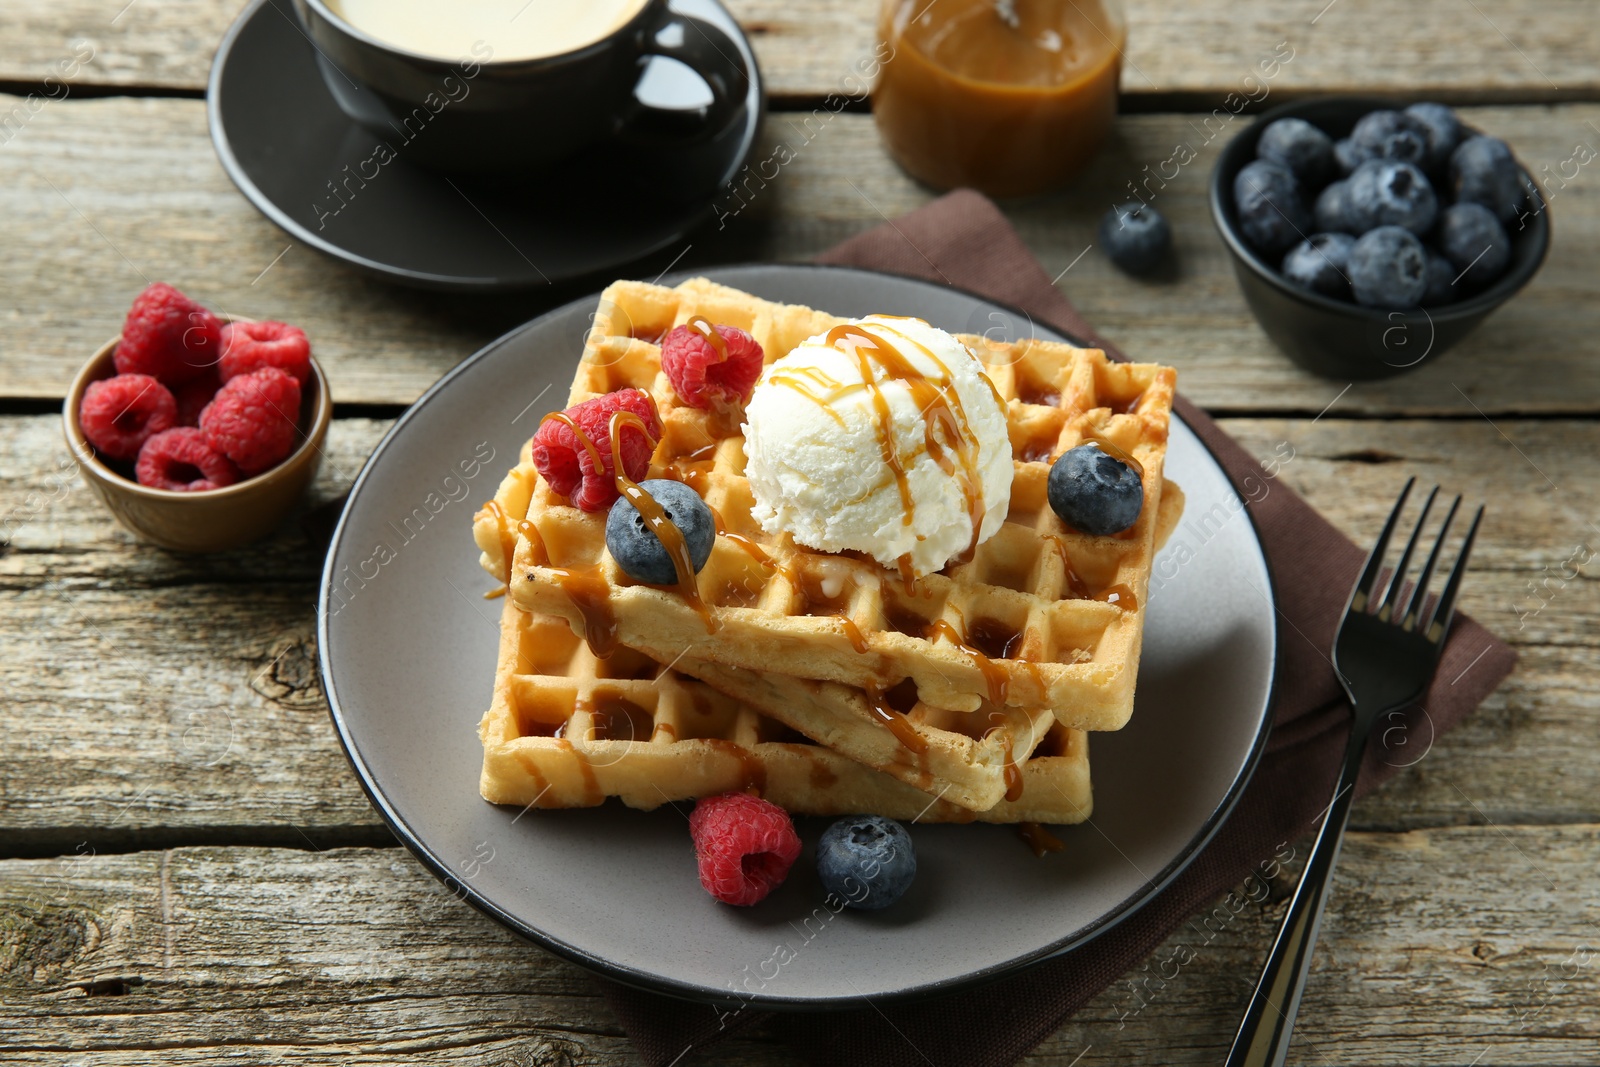 Photo of Delicious Belgian waffles with ice cream, berries and caramel sauce on wooden table